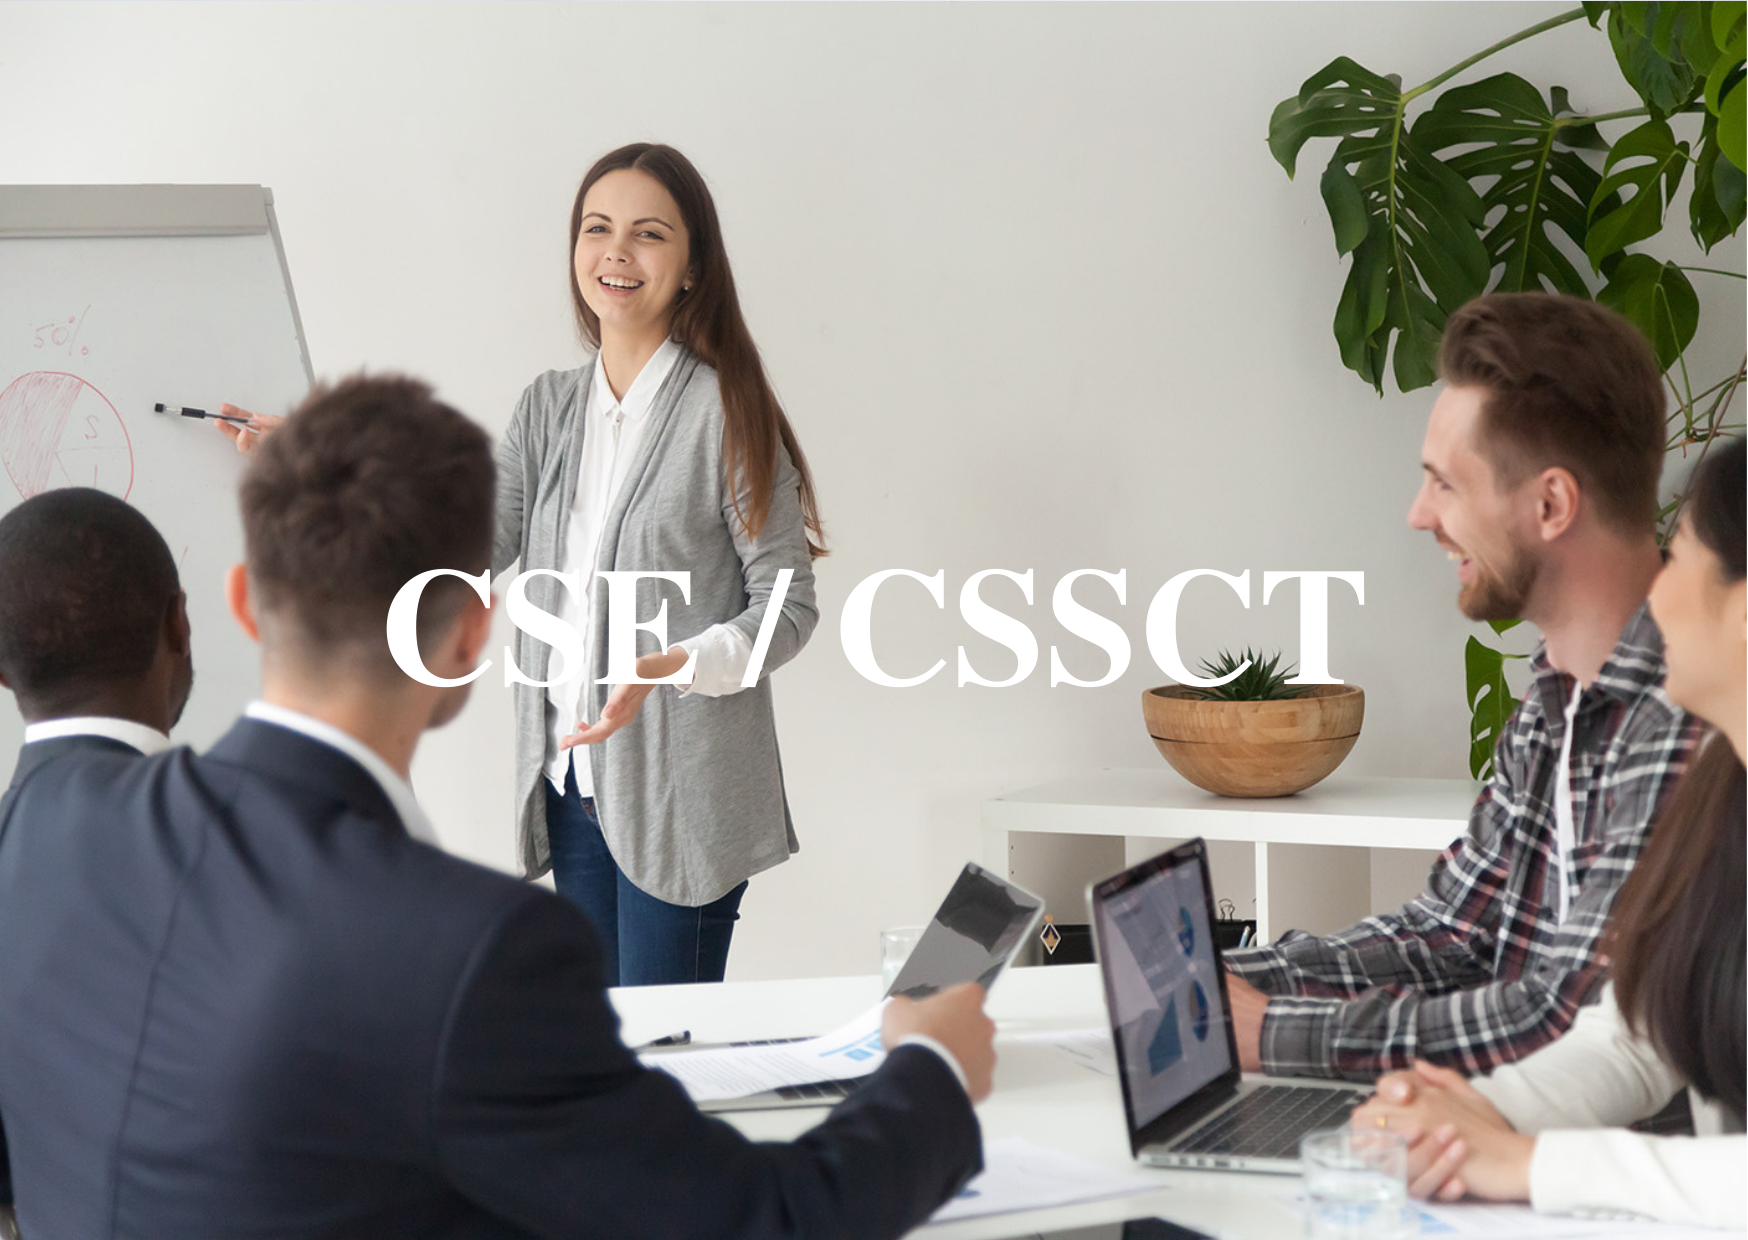 formation cse/cssct os formation aquitaine